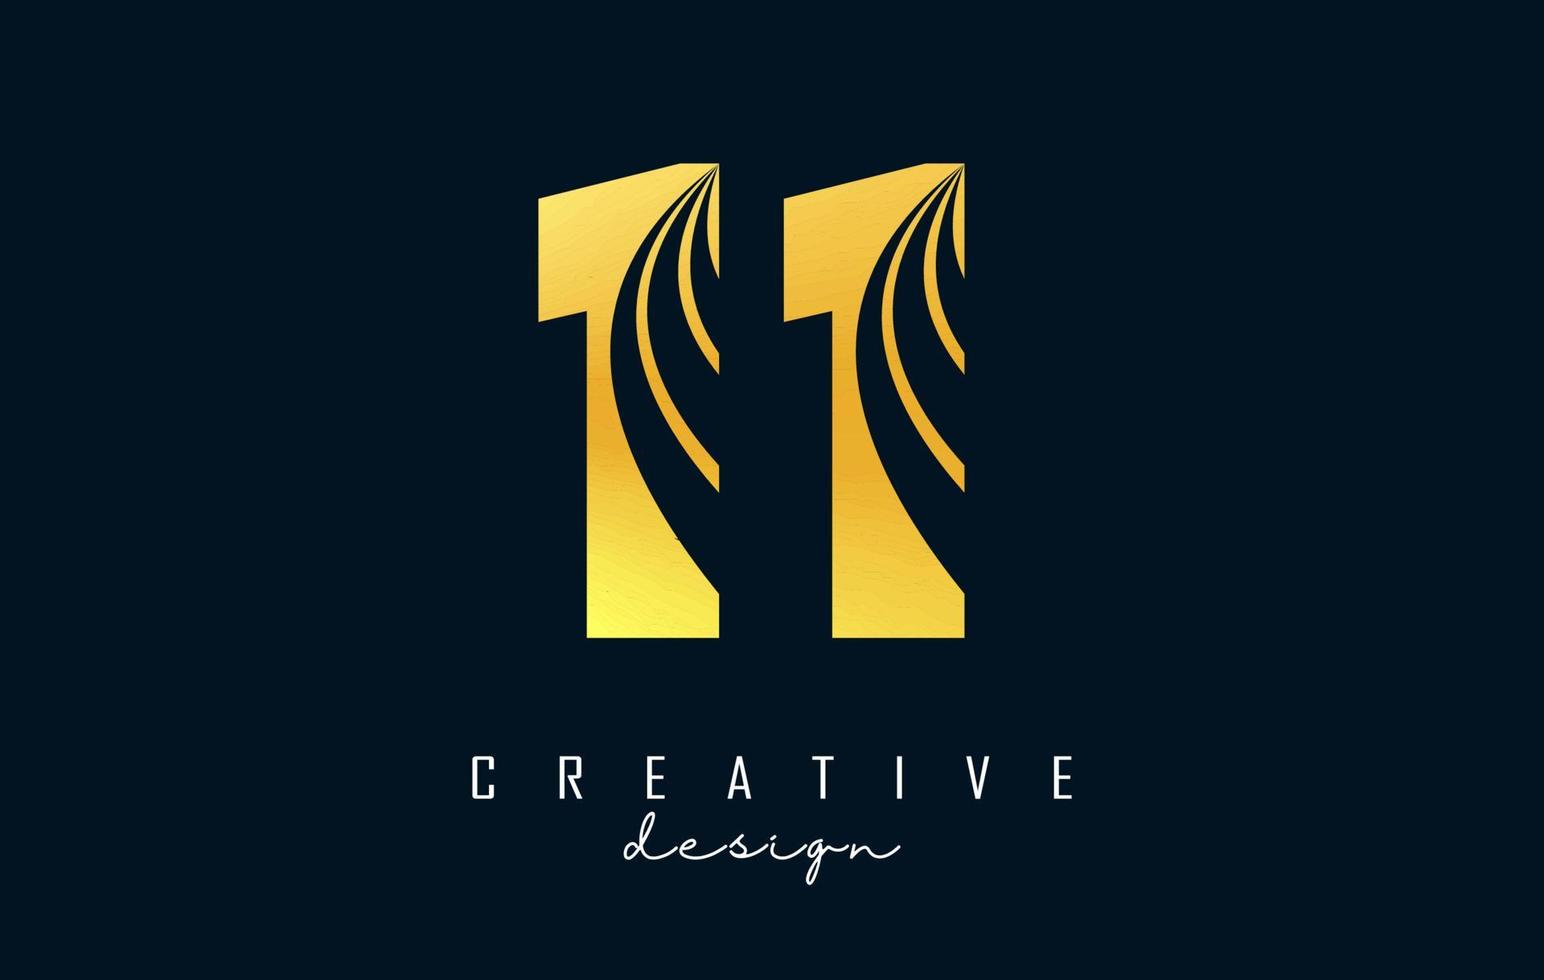 Golden Creative number 11 1 logo with leading lines and road concept design. Number with geometric design. vector